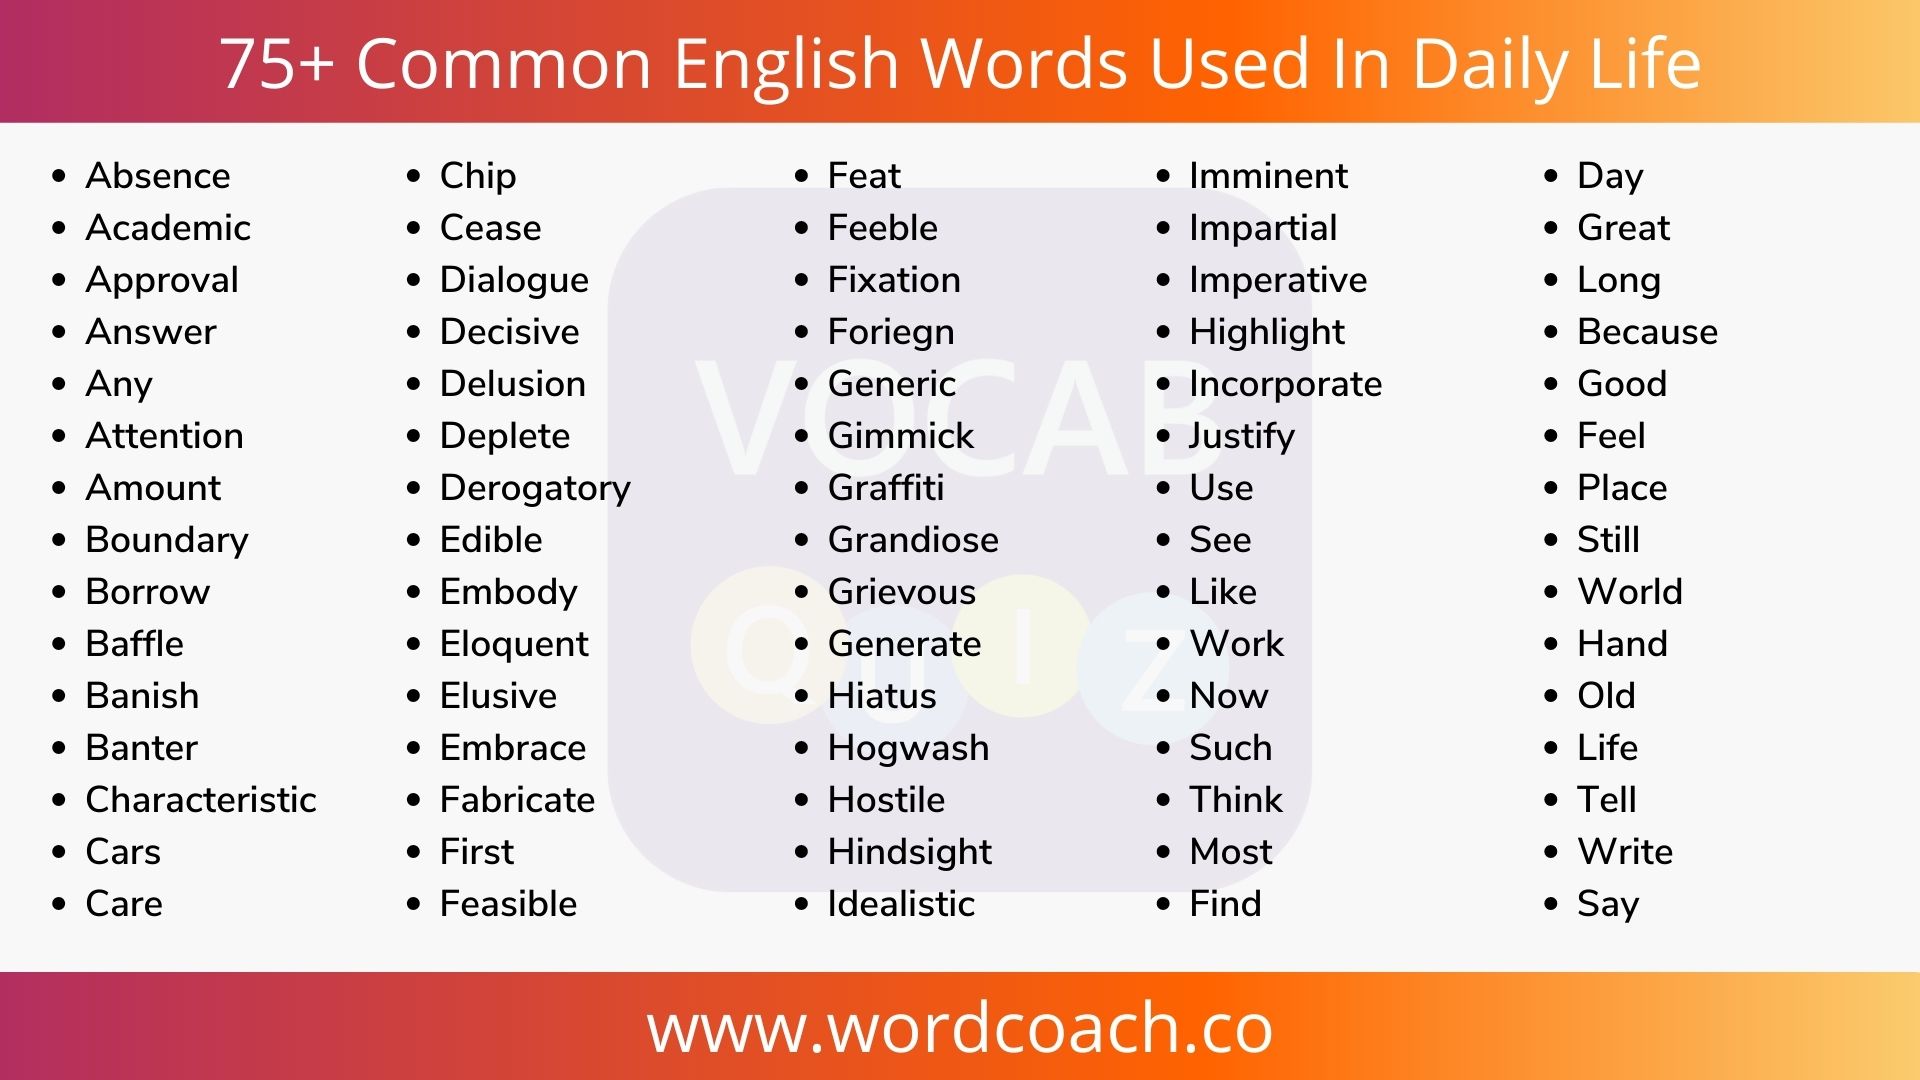 75+ Common English Words Used In Daily Life - wordcoach.co